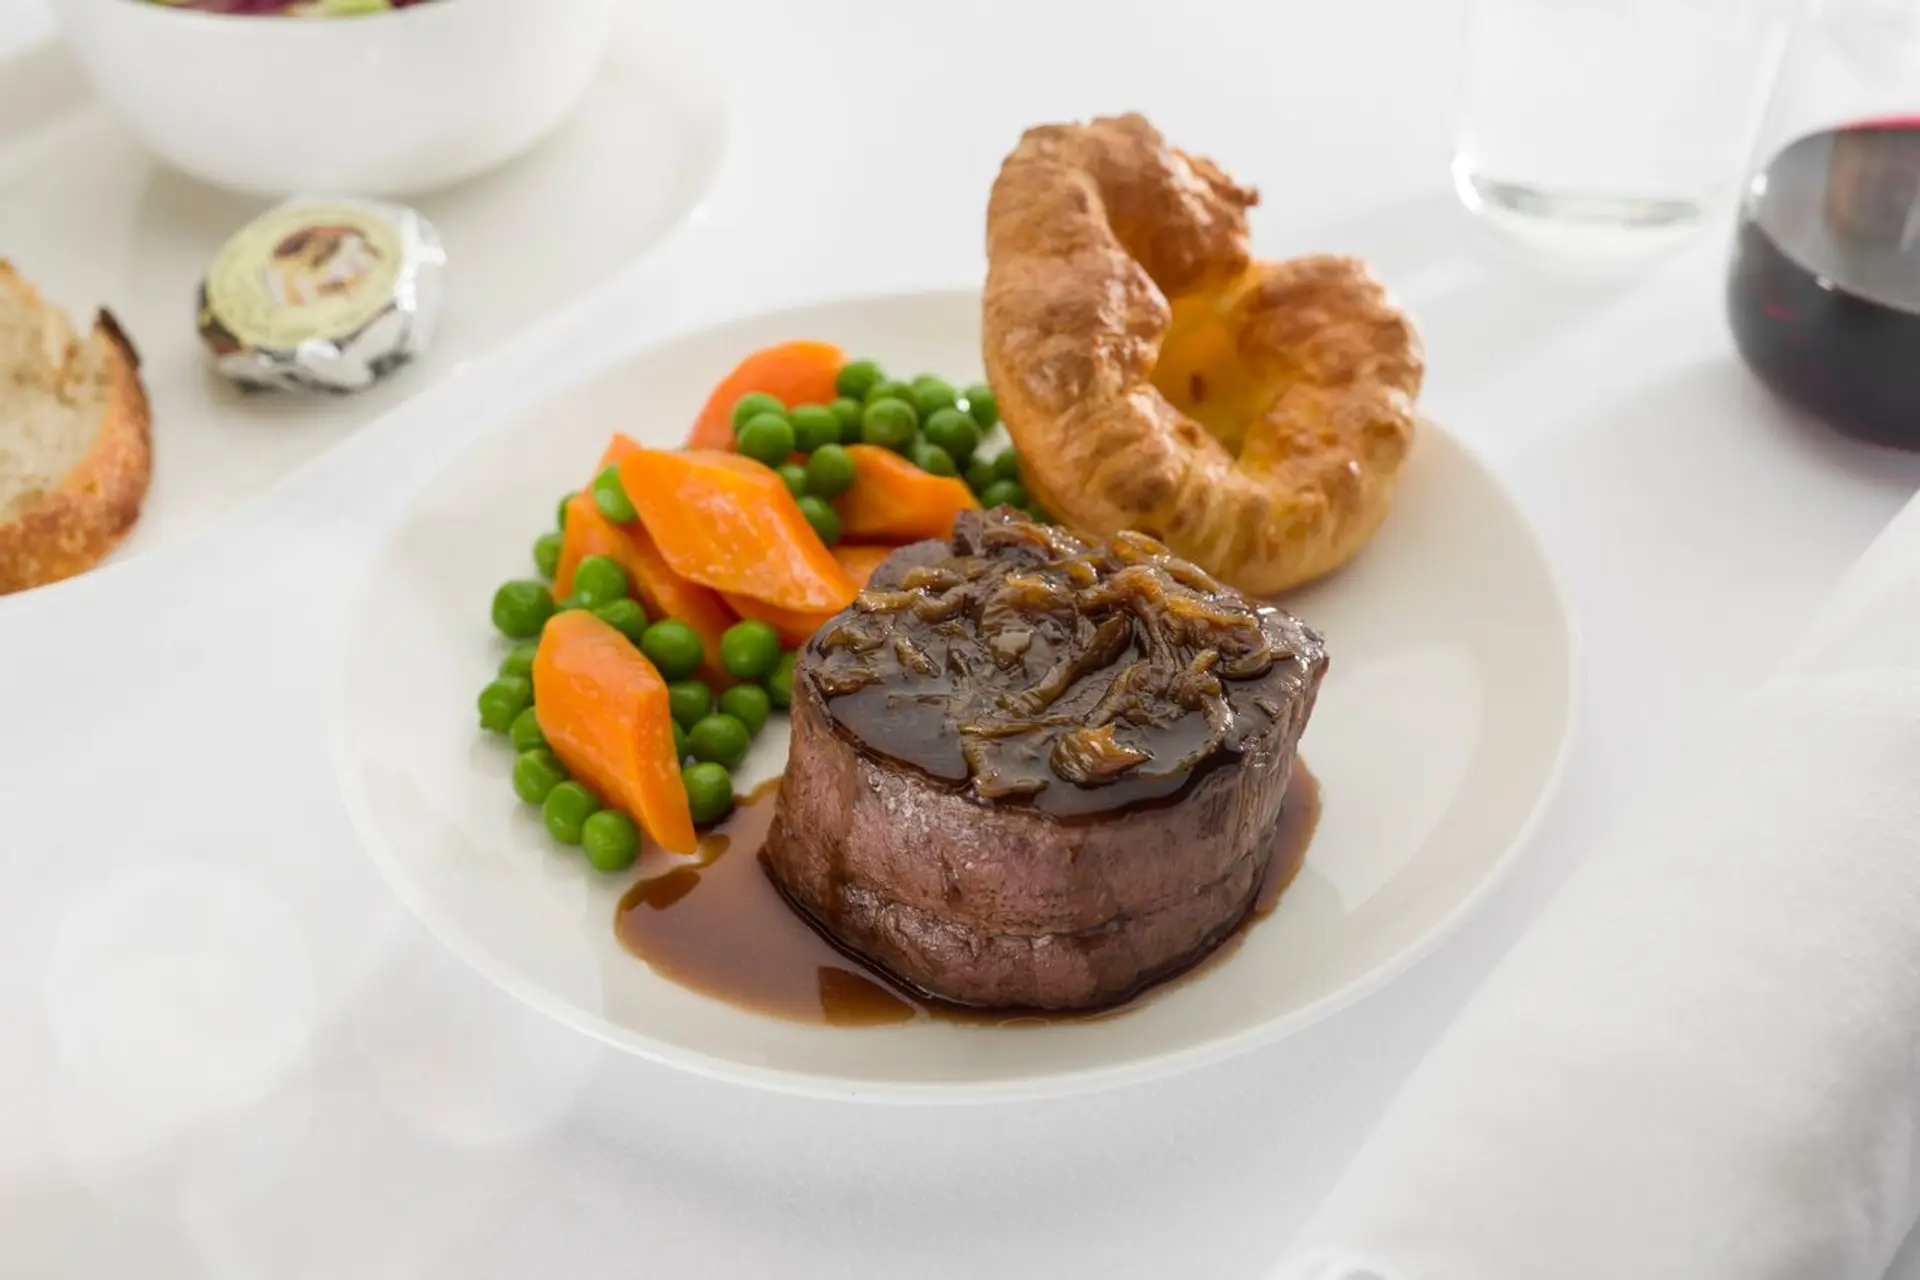 Roast-English-beef-with-Yorkshire-pudding-peas-and-onion-gravy-Business-menu-ex-LHR-B787_preview.jpg